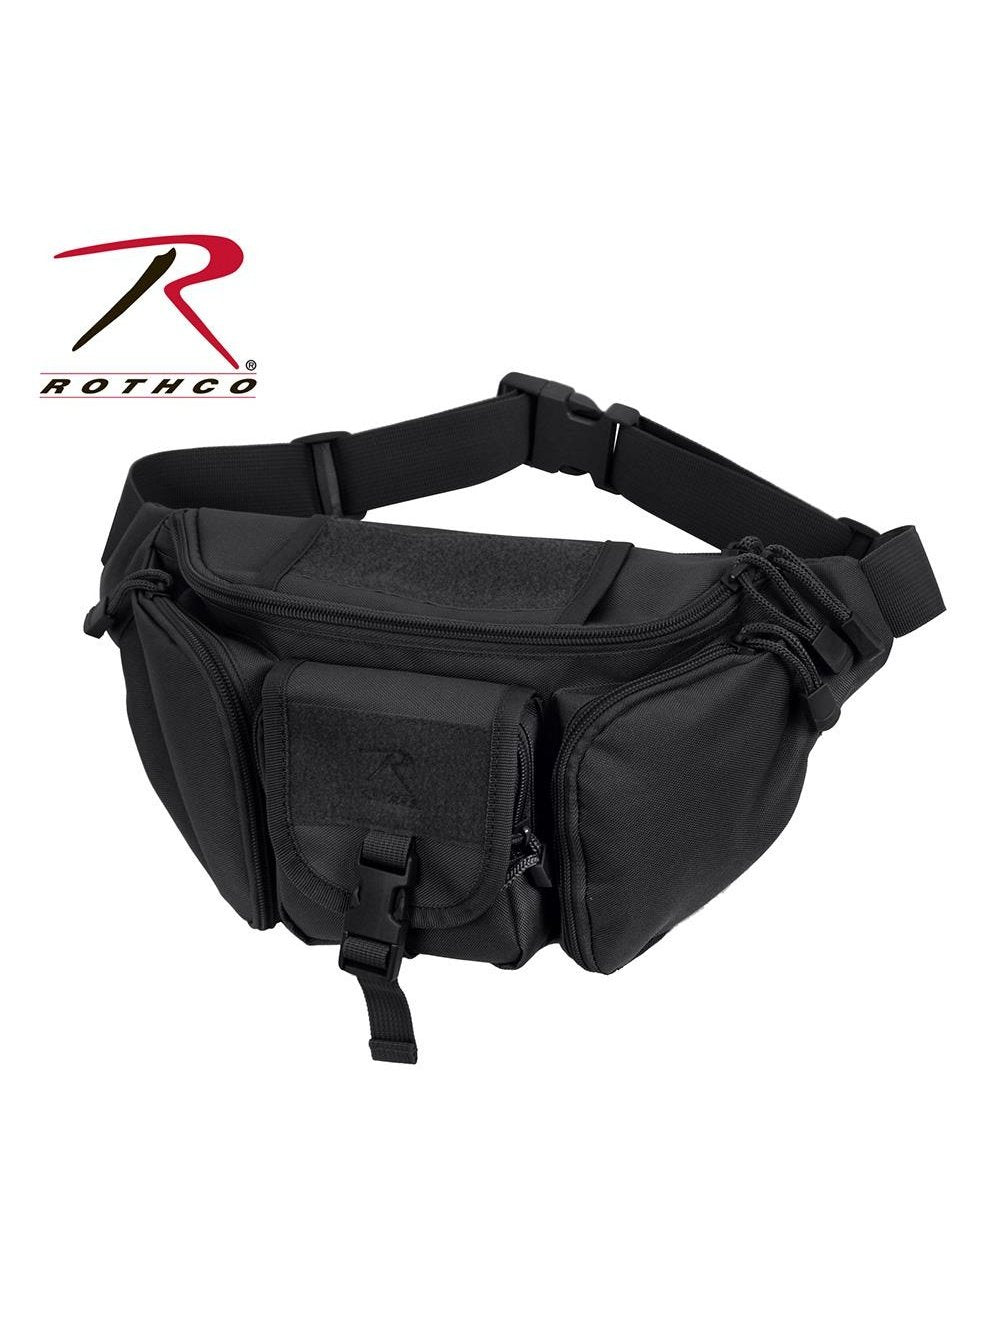 Rothco Tactical Concealed Carry Waist Pack Black 4957.